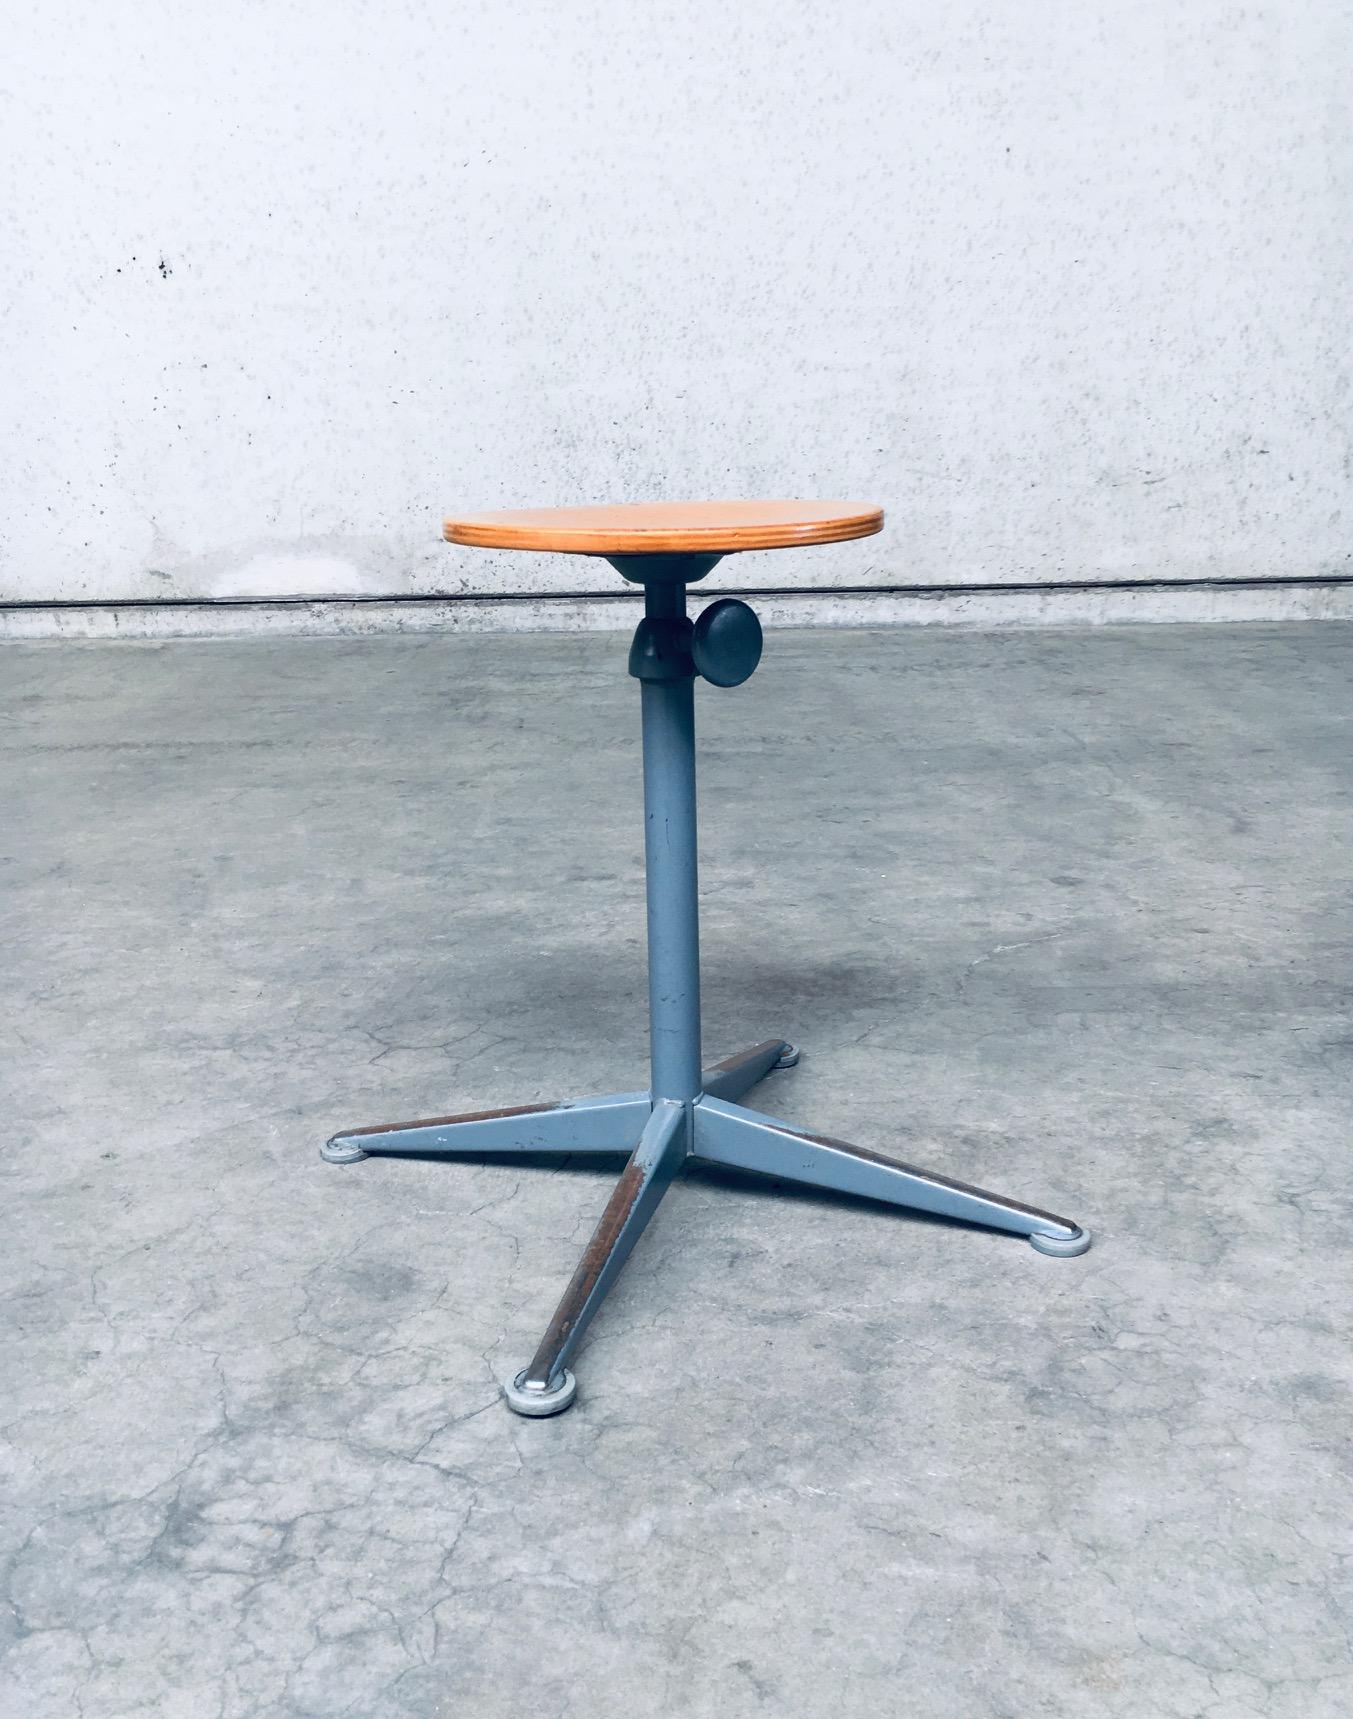 Vintage Dutch Industrial Design Atelier Stool by Friso Kramer for Ahrend De Cirkel. Made in the Netherlands, 1950's / 60's period. Adjustable in height. Grey lacquered steel base with beech wood round seat. This comes in very good, original